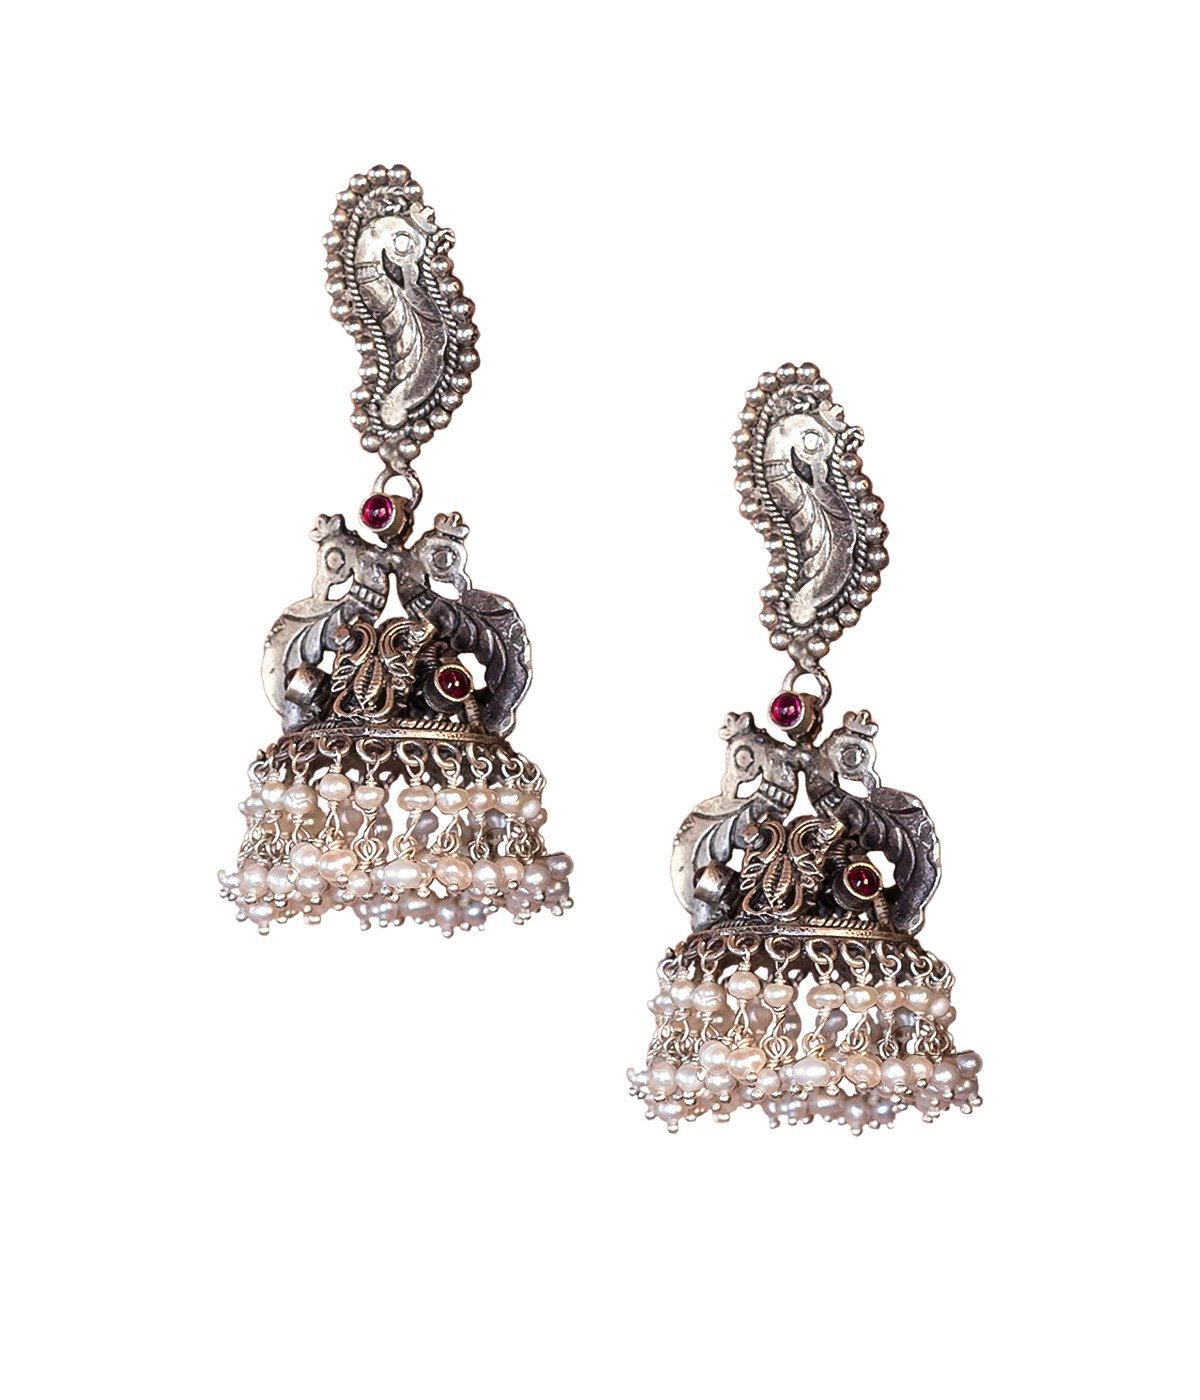 92.5 OXIDISED SILVER PEACOCK DESIGN JHUMKA EARRINGS FOR WOMEN AND GIRLS